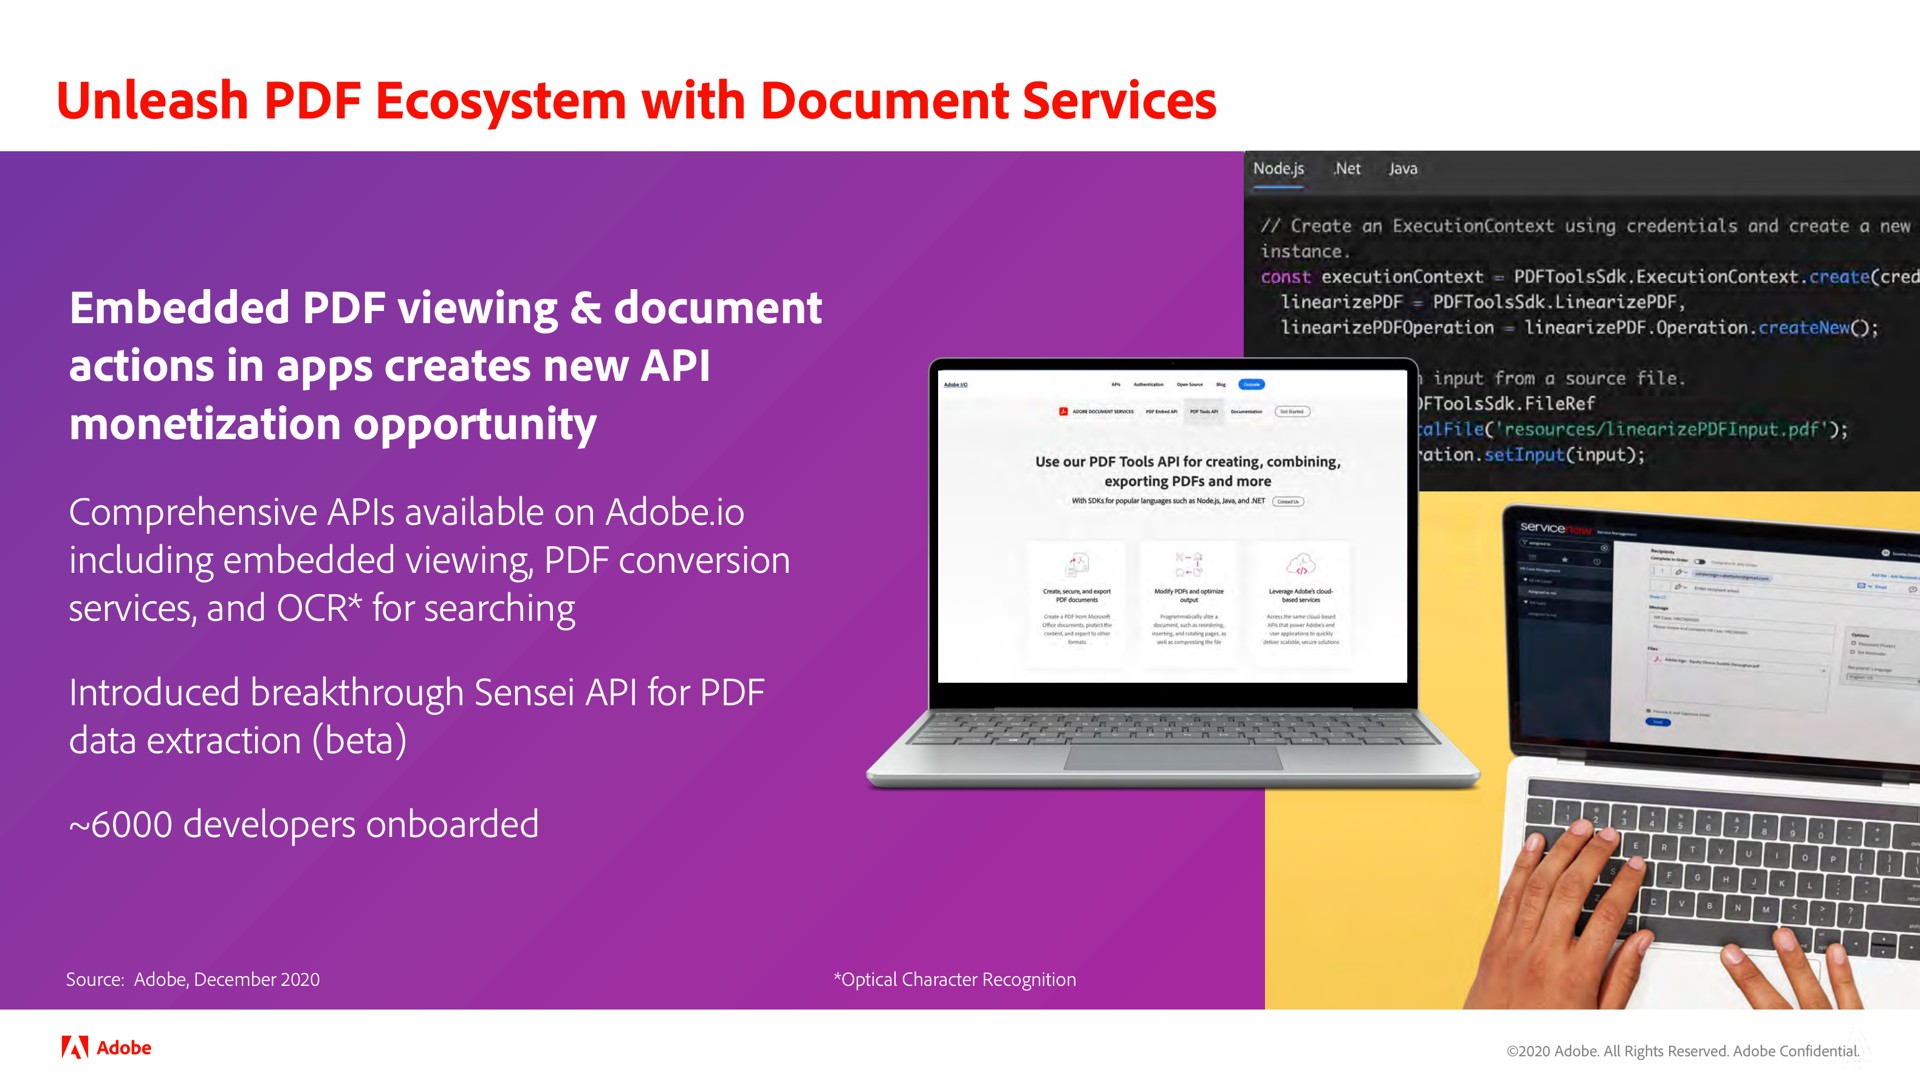 unleash ecosystem with document services sab | Adobe